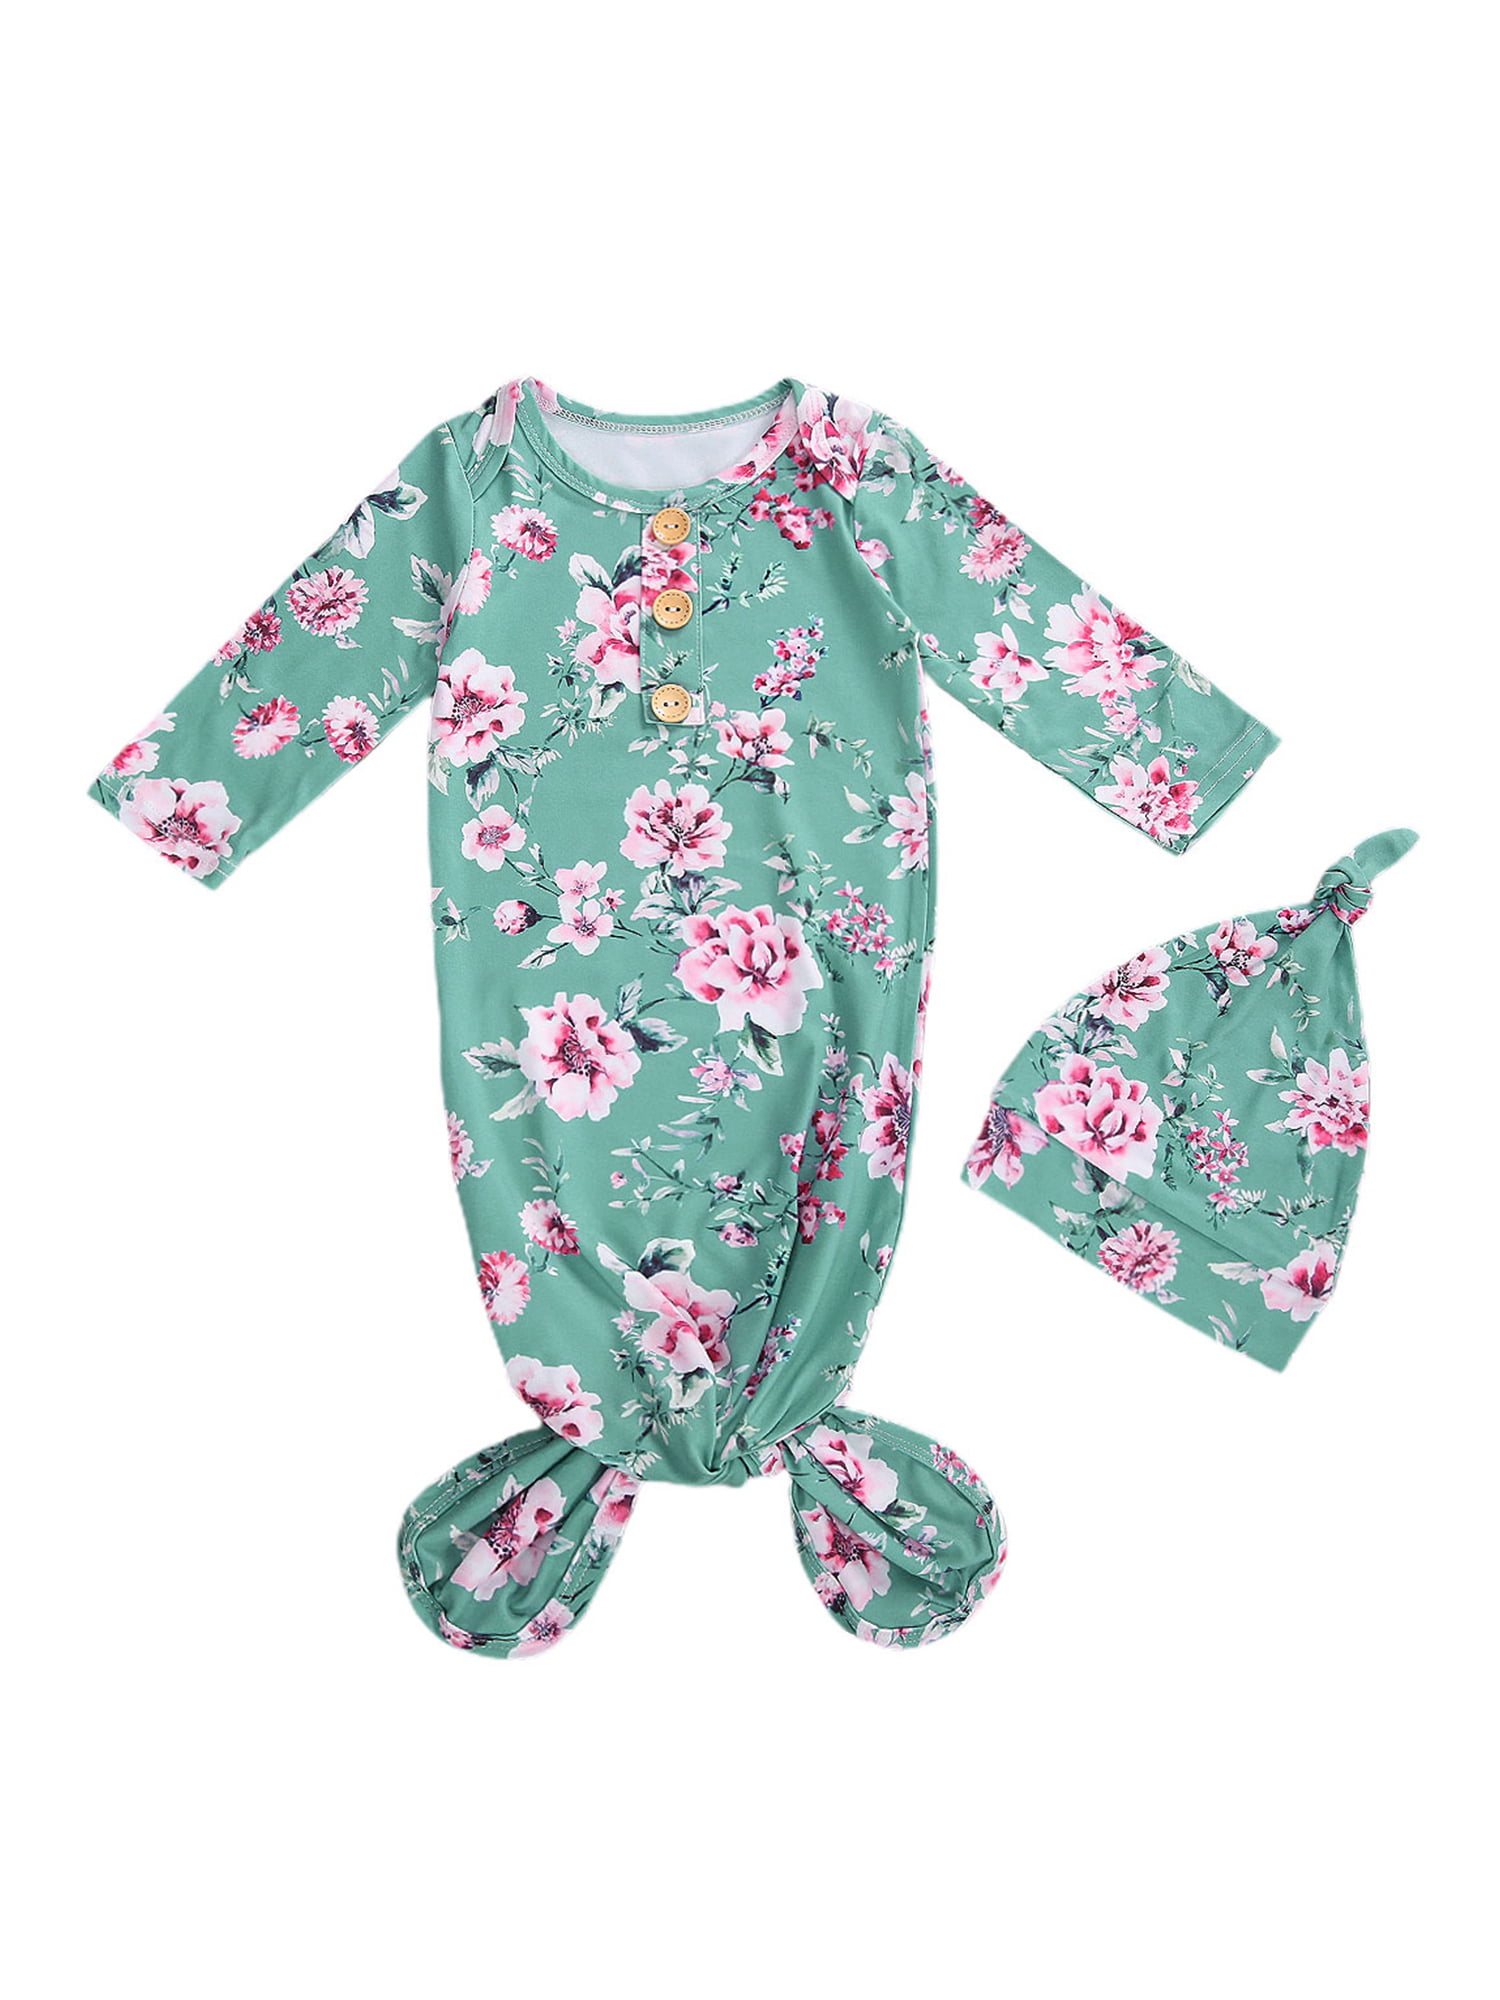 2Pcs Newborn Infant Baby Girls Boy Floral Print Pajamas Gown Swaddle Outfits 